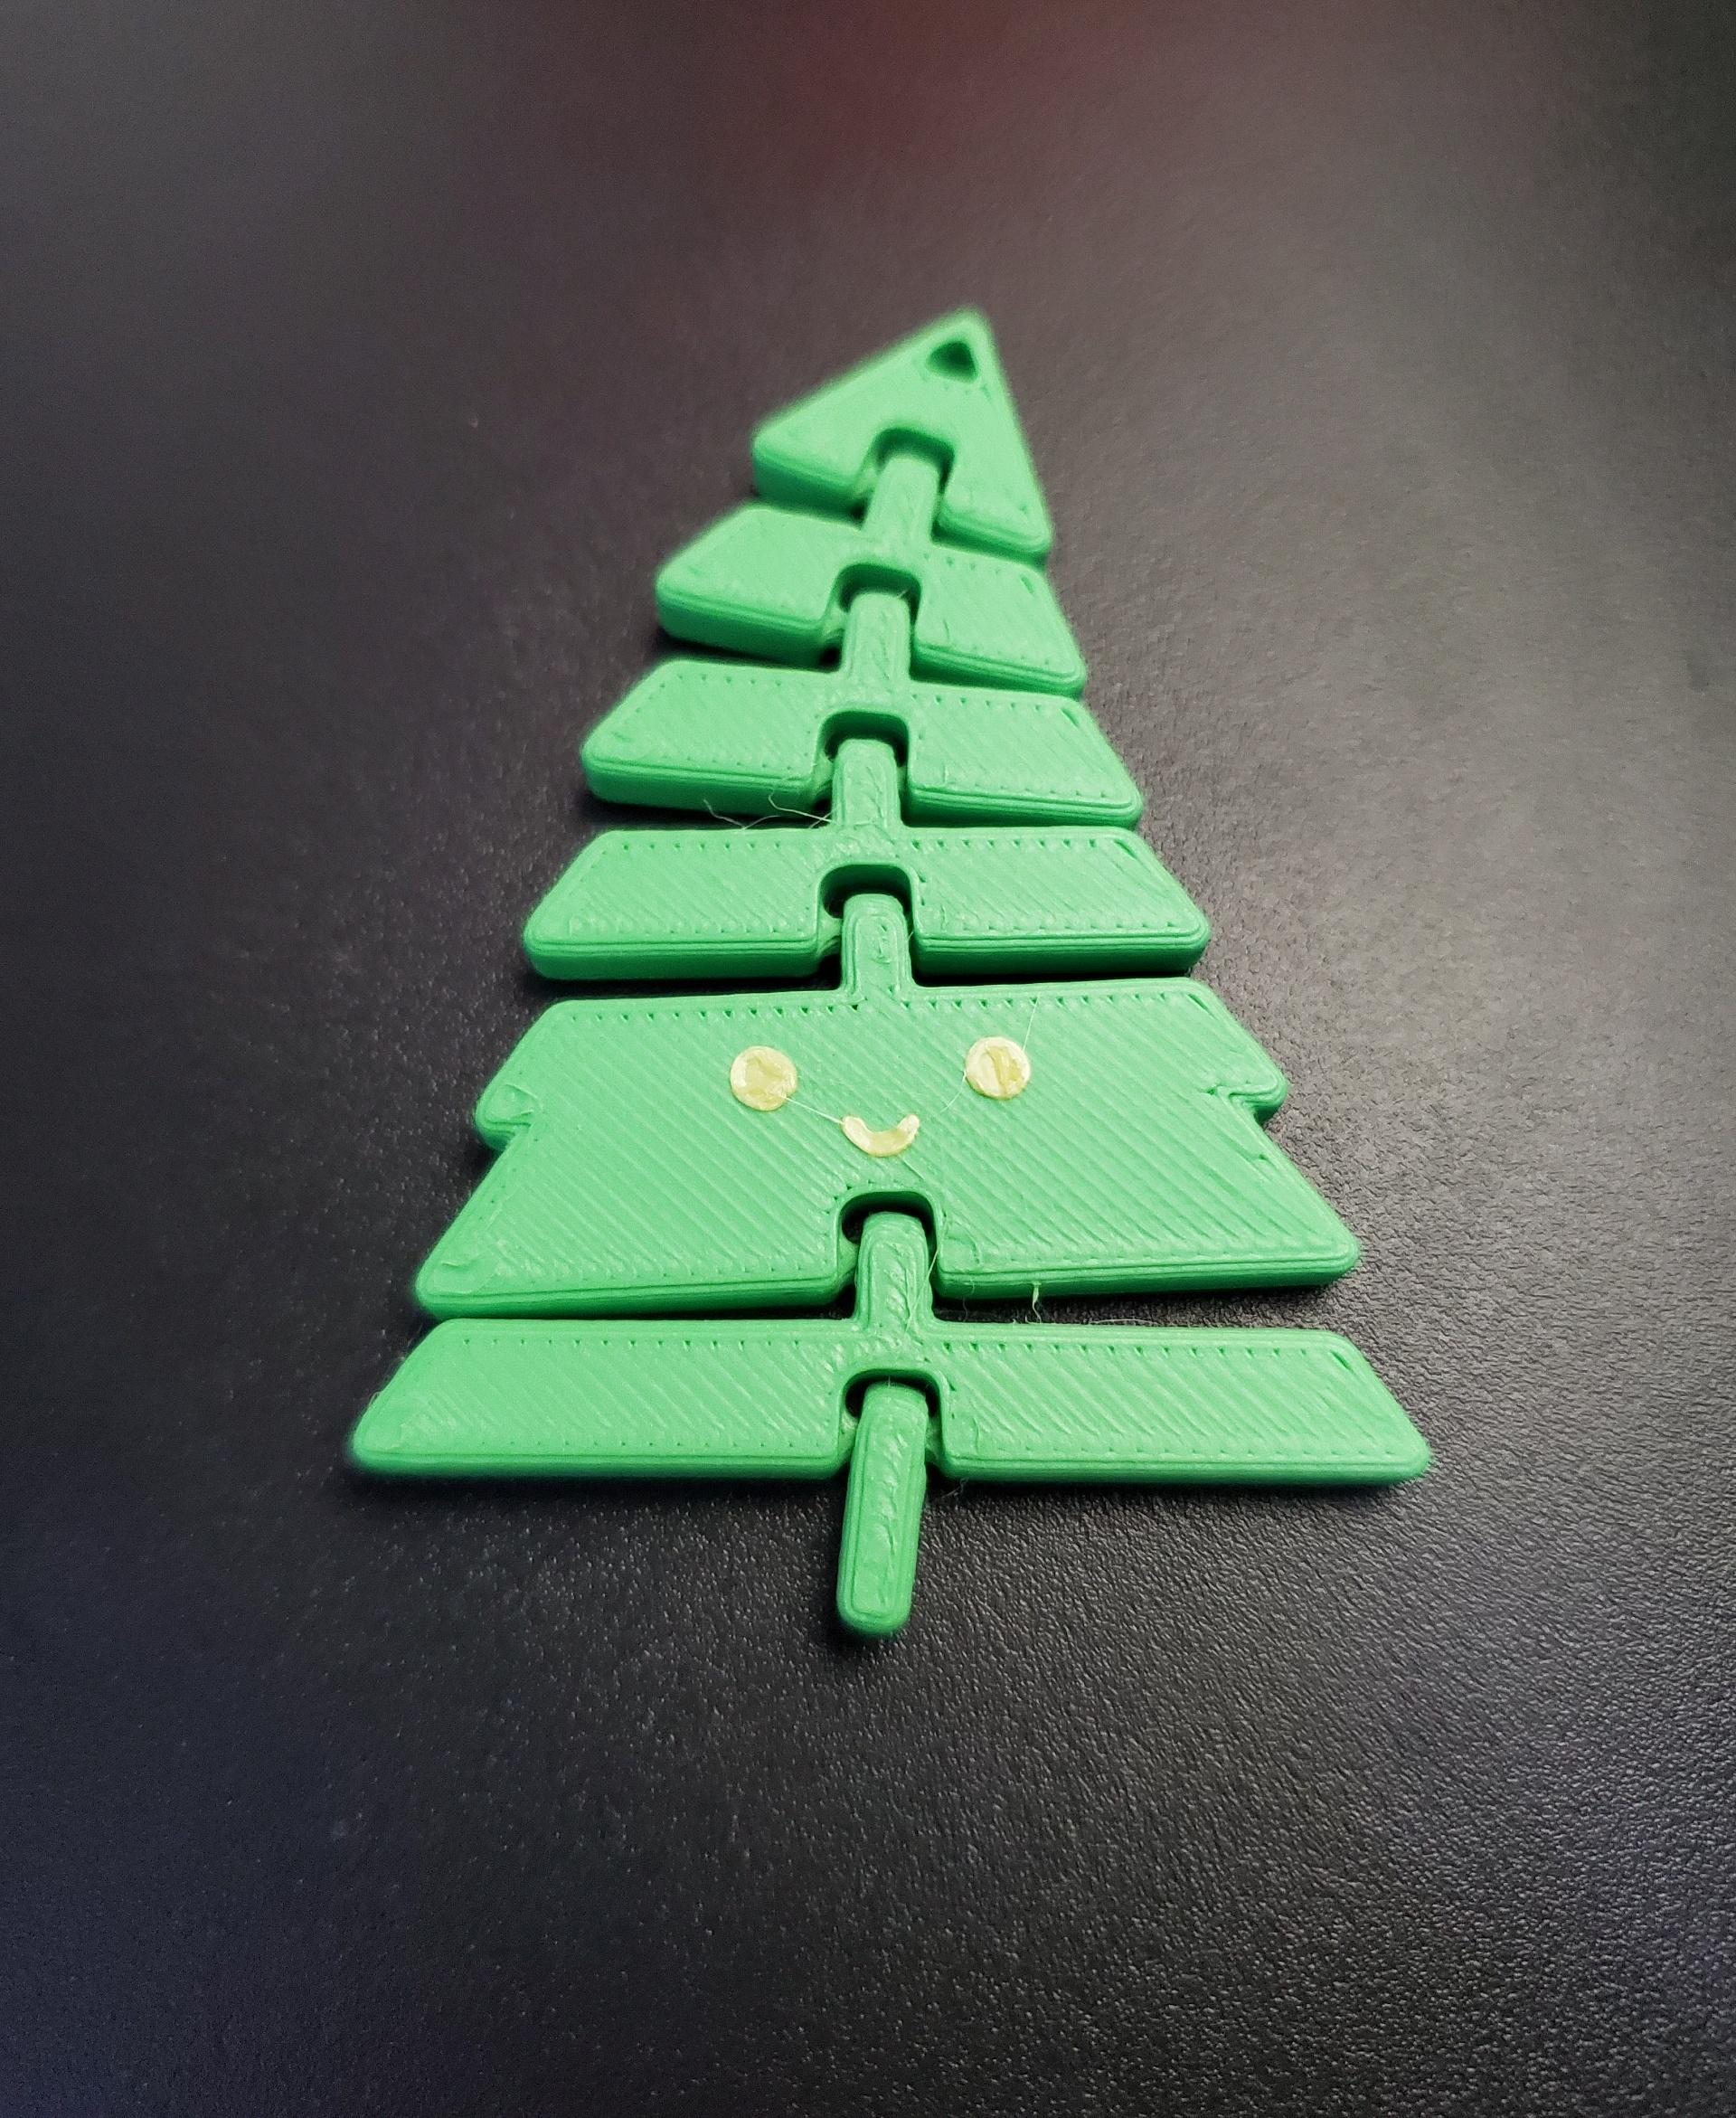 Articulated Kawaii Christmas Tree Keychain - Print in place fidget toy - 3mf - polyterra forest green - 3d model